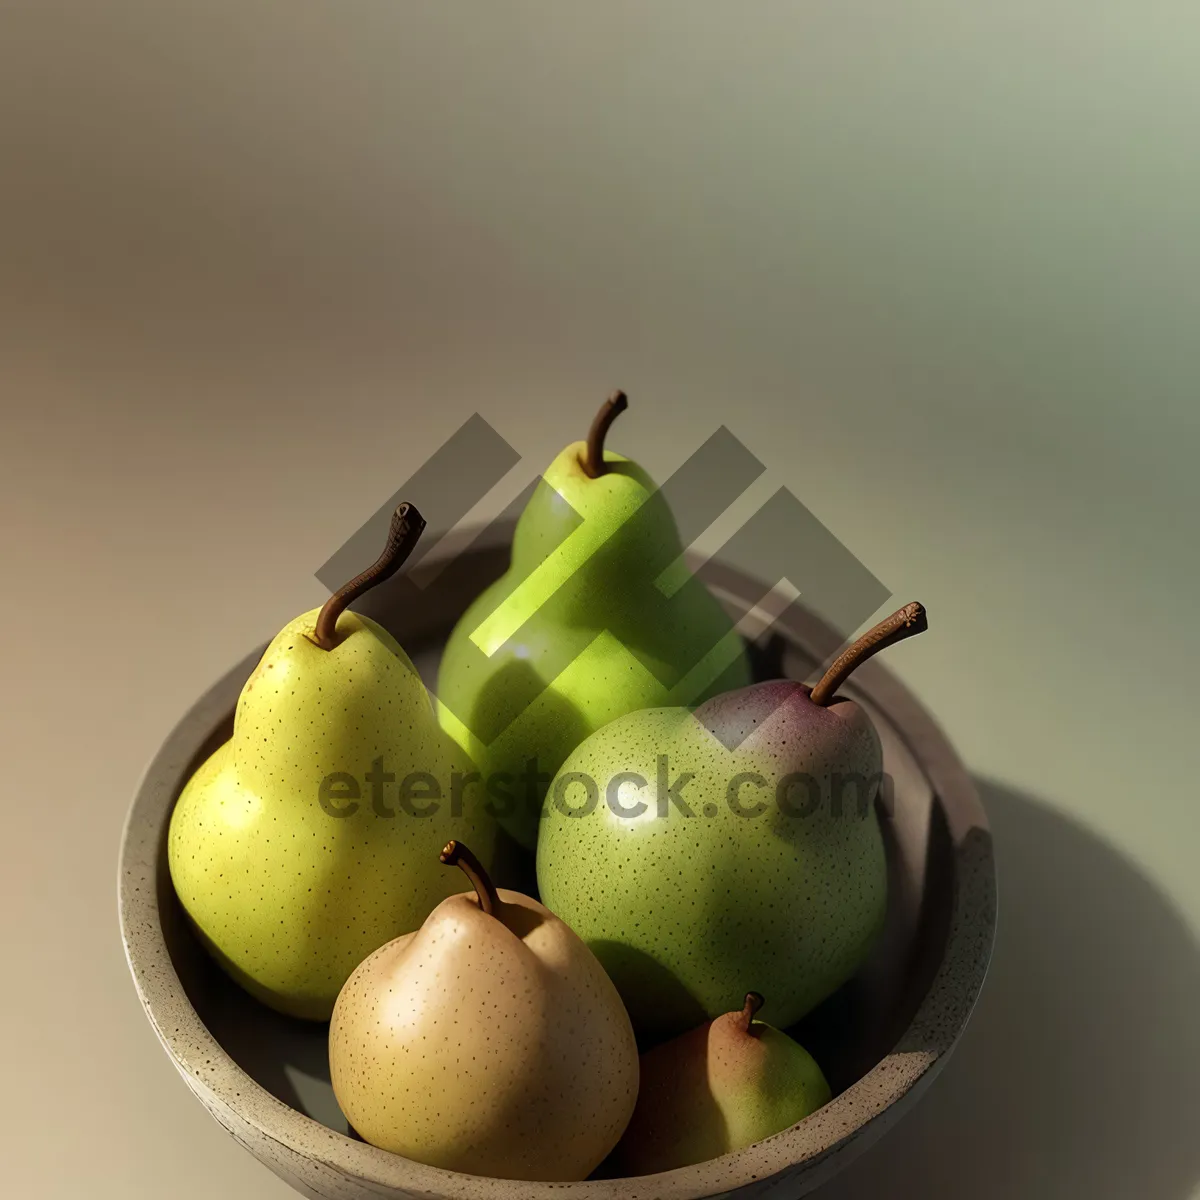 Picture of Fresh and Juicy Granny Smith Apples: A Healthy, Delicious Snack